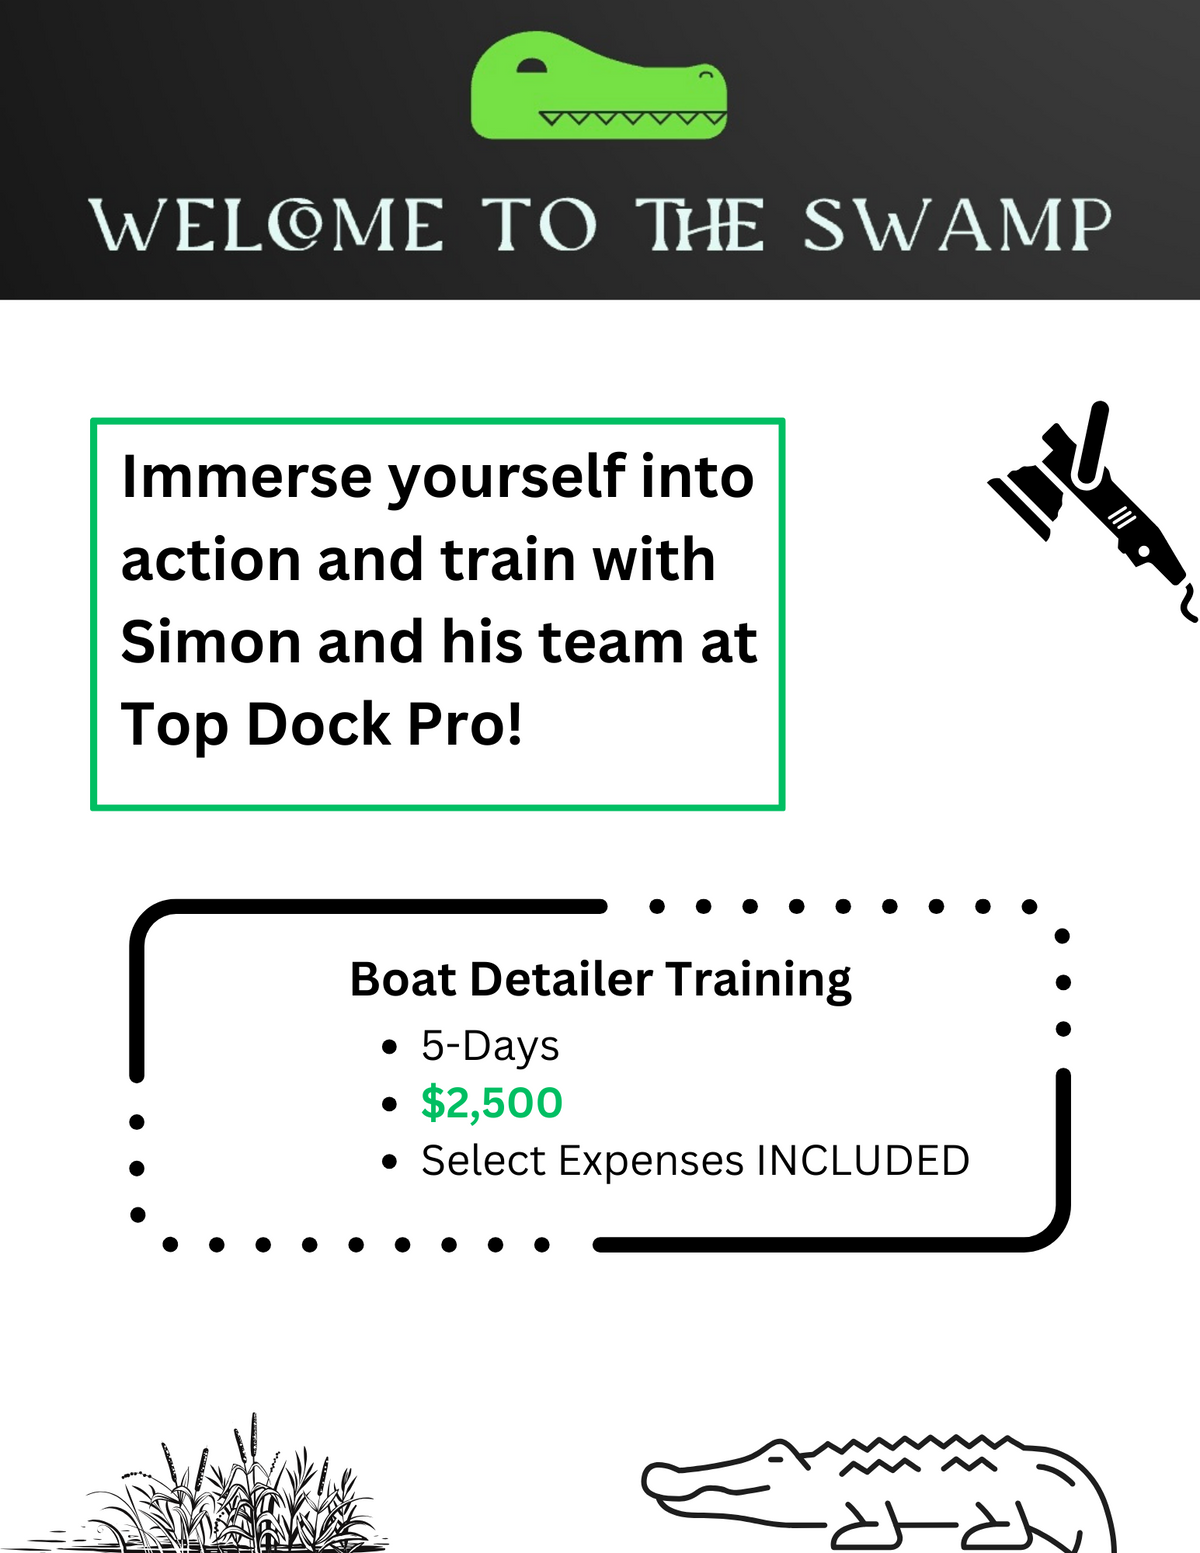 Welcome to the Swamp - Training Program